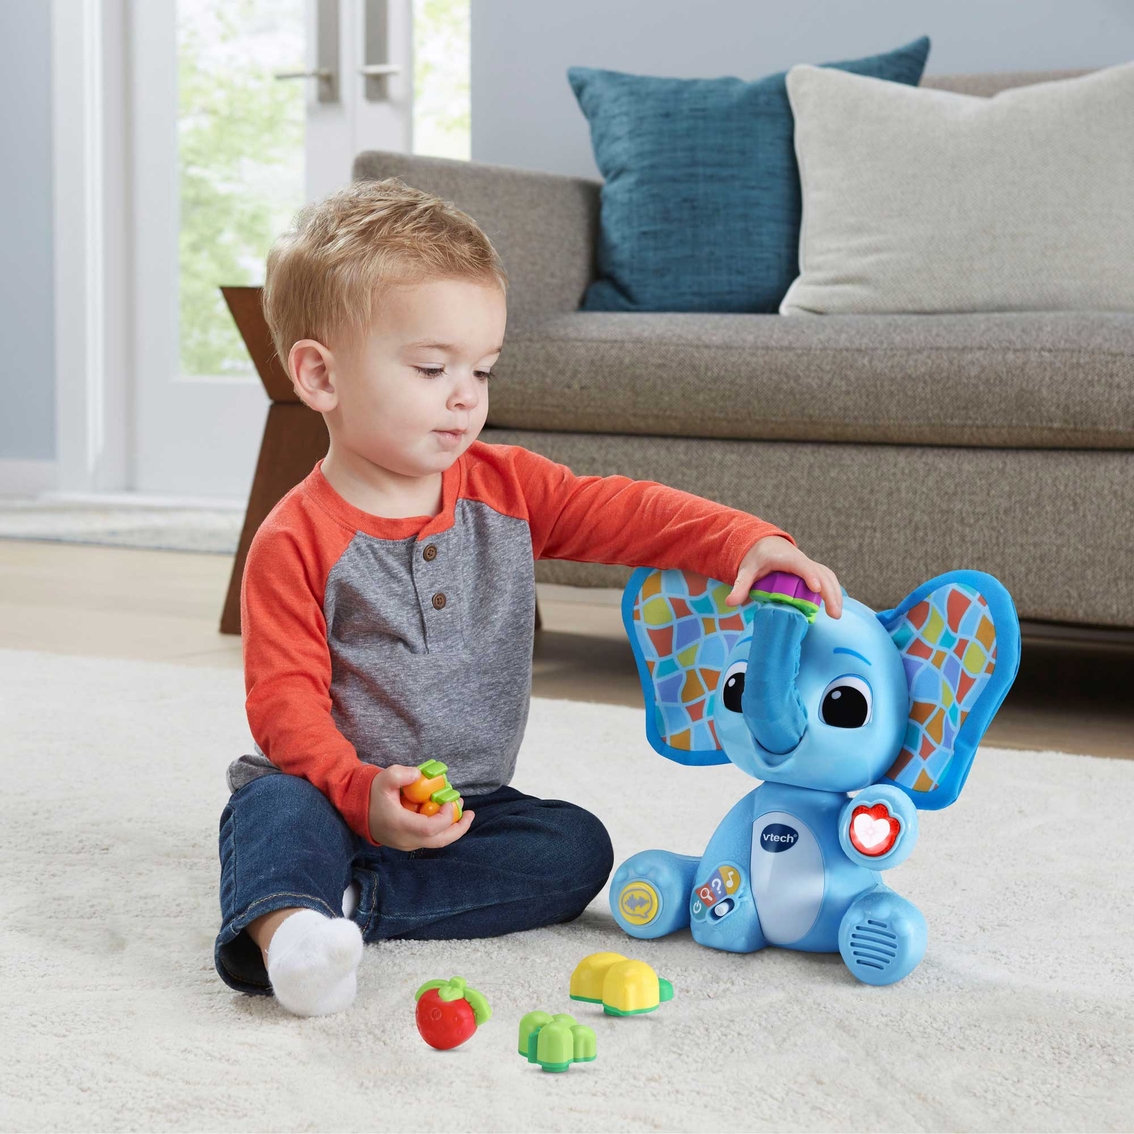 Vtech Smellephant Interactive Elephant With Magical Trunk | Learning ...